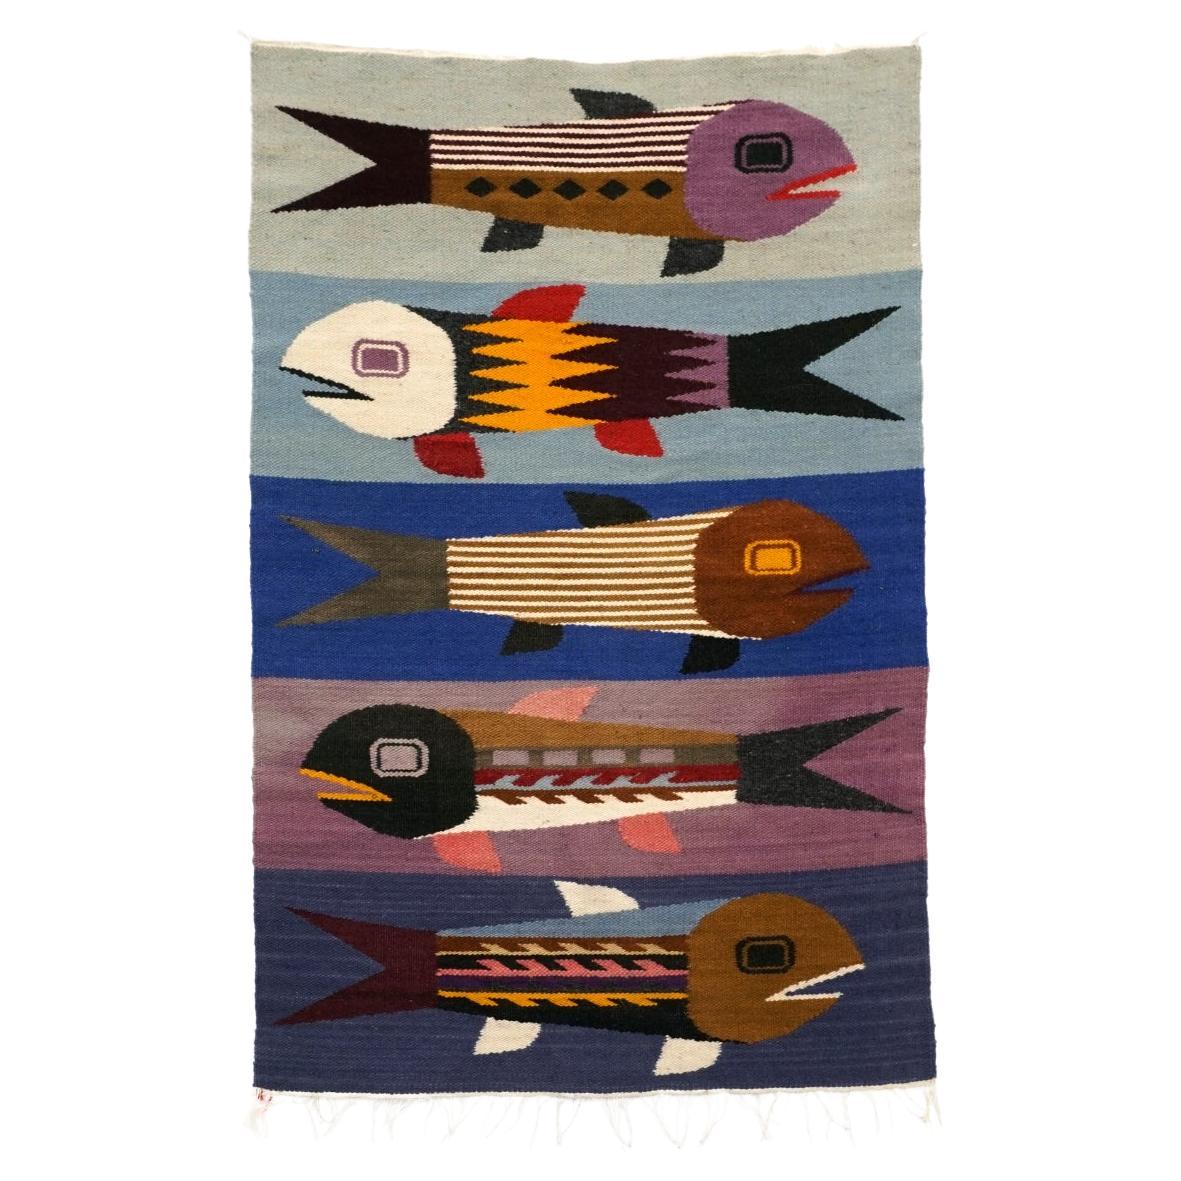 Fish Motif Tapestry in the Style of Evelyn Ackerman, Vibrant Multicolor